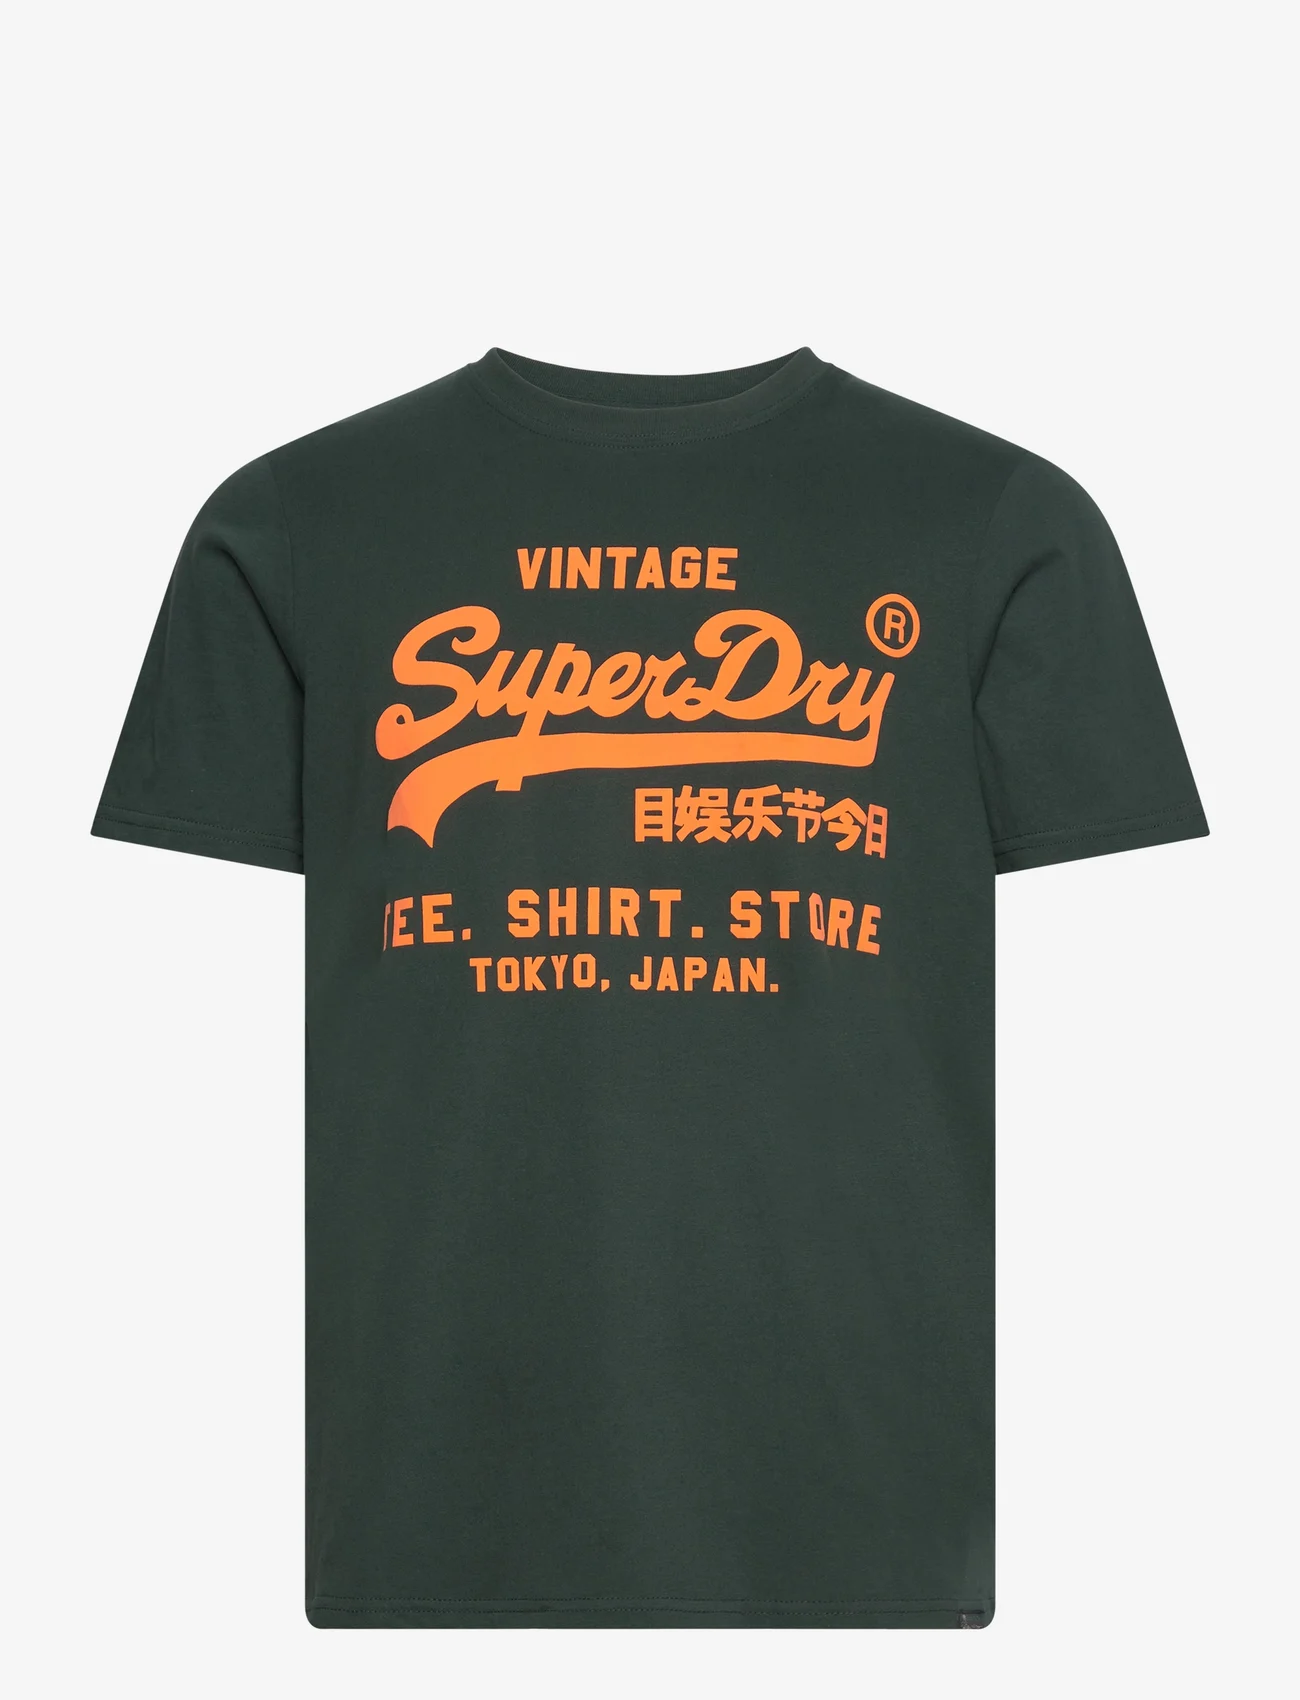 Superdry - NEON VL T SHIRT - lowest prices - enamel green - 0